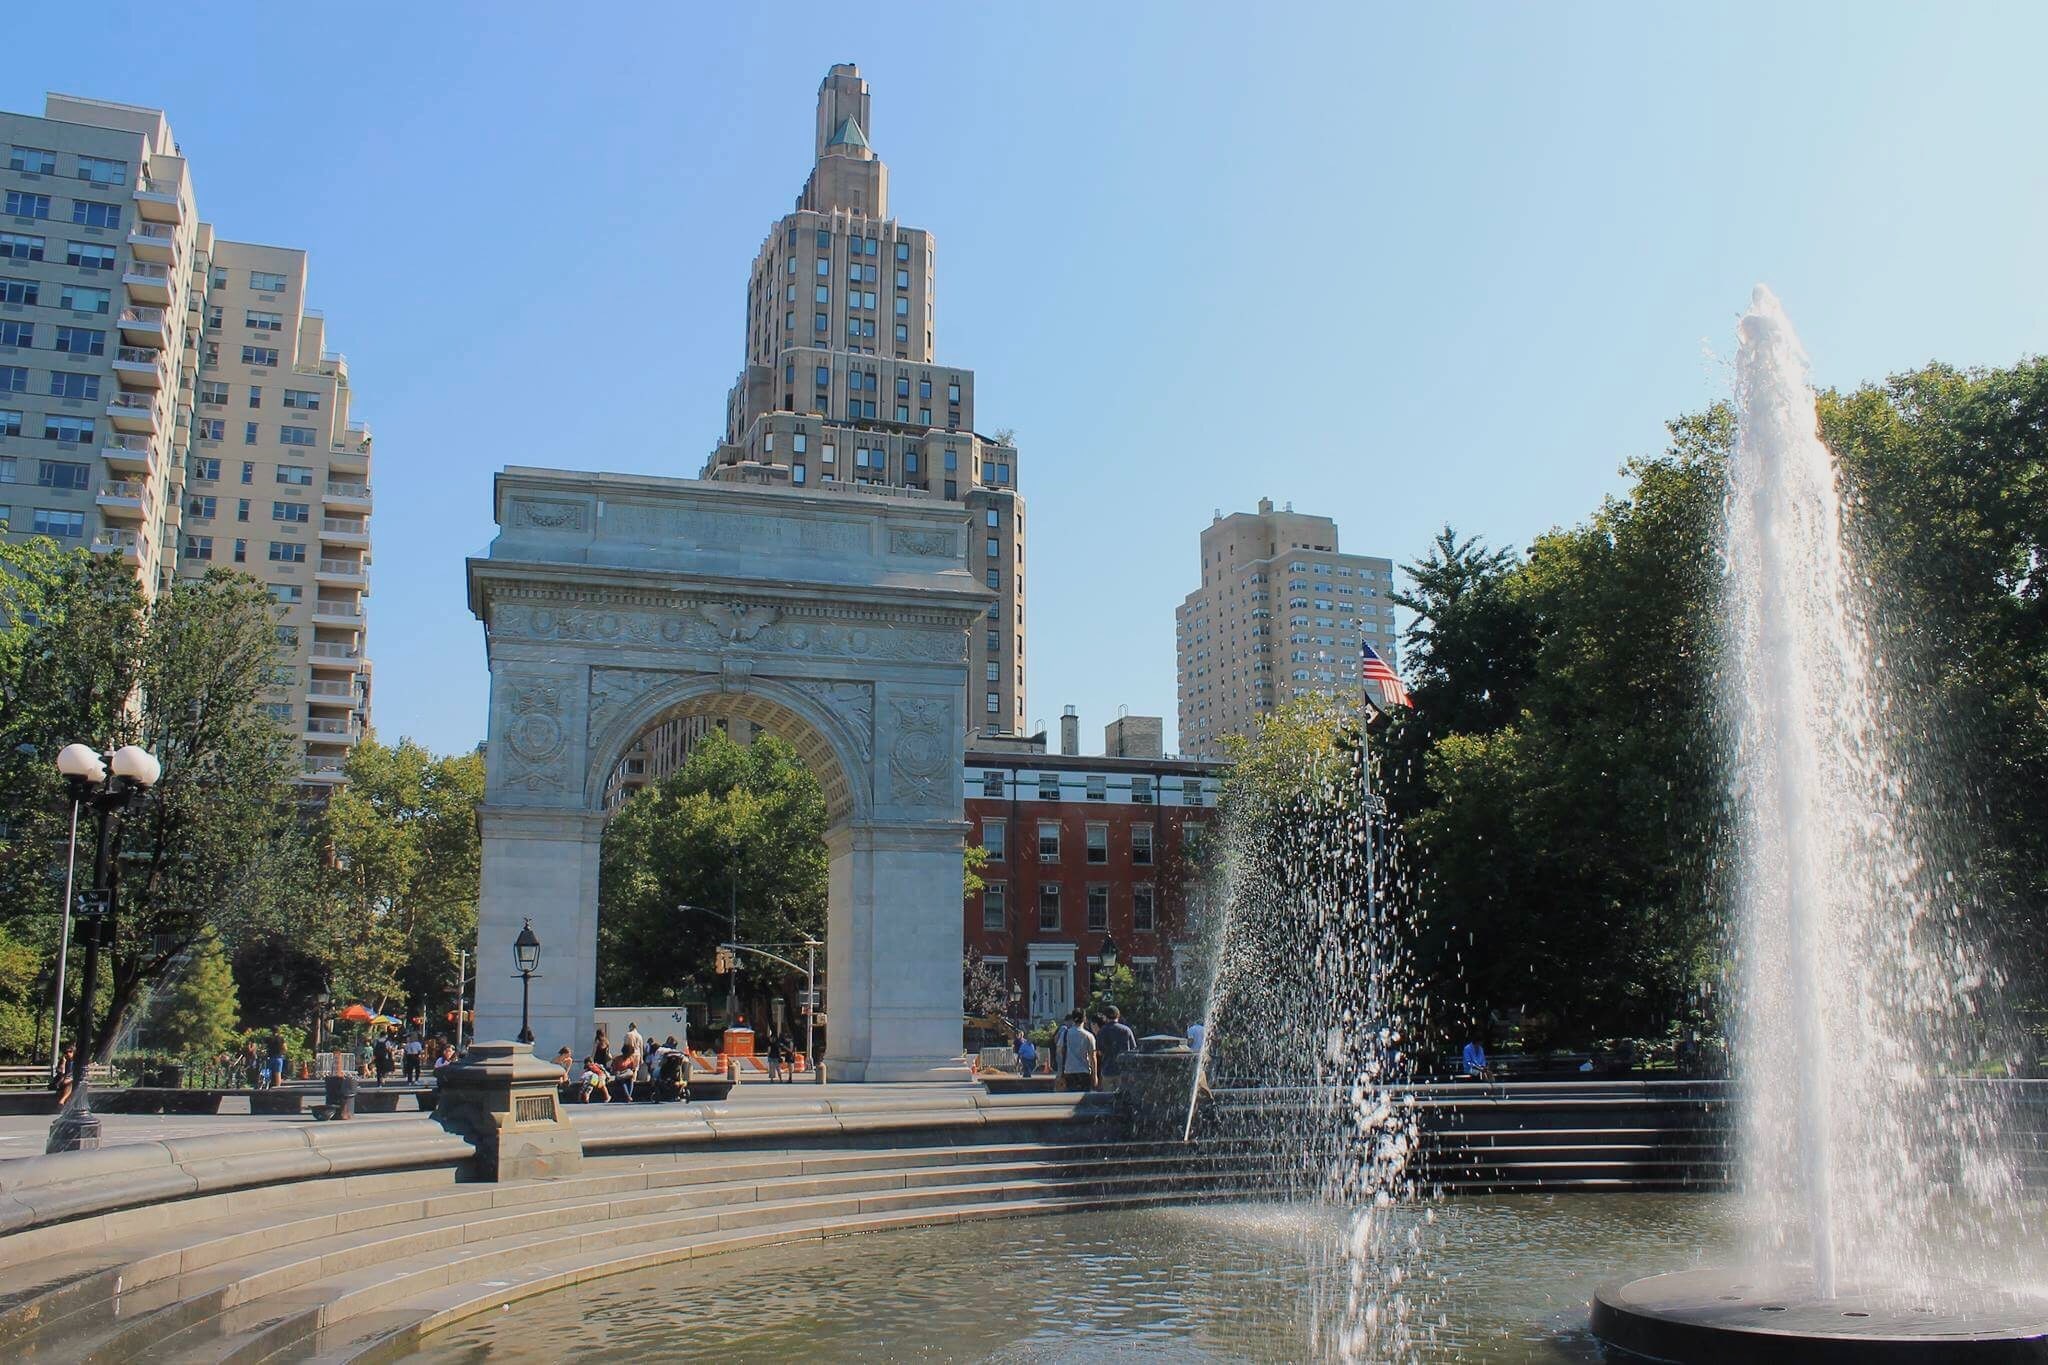 Image of Washington Square park with fountain running